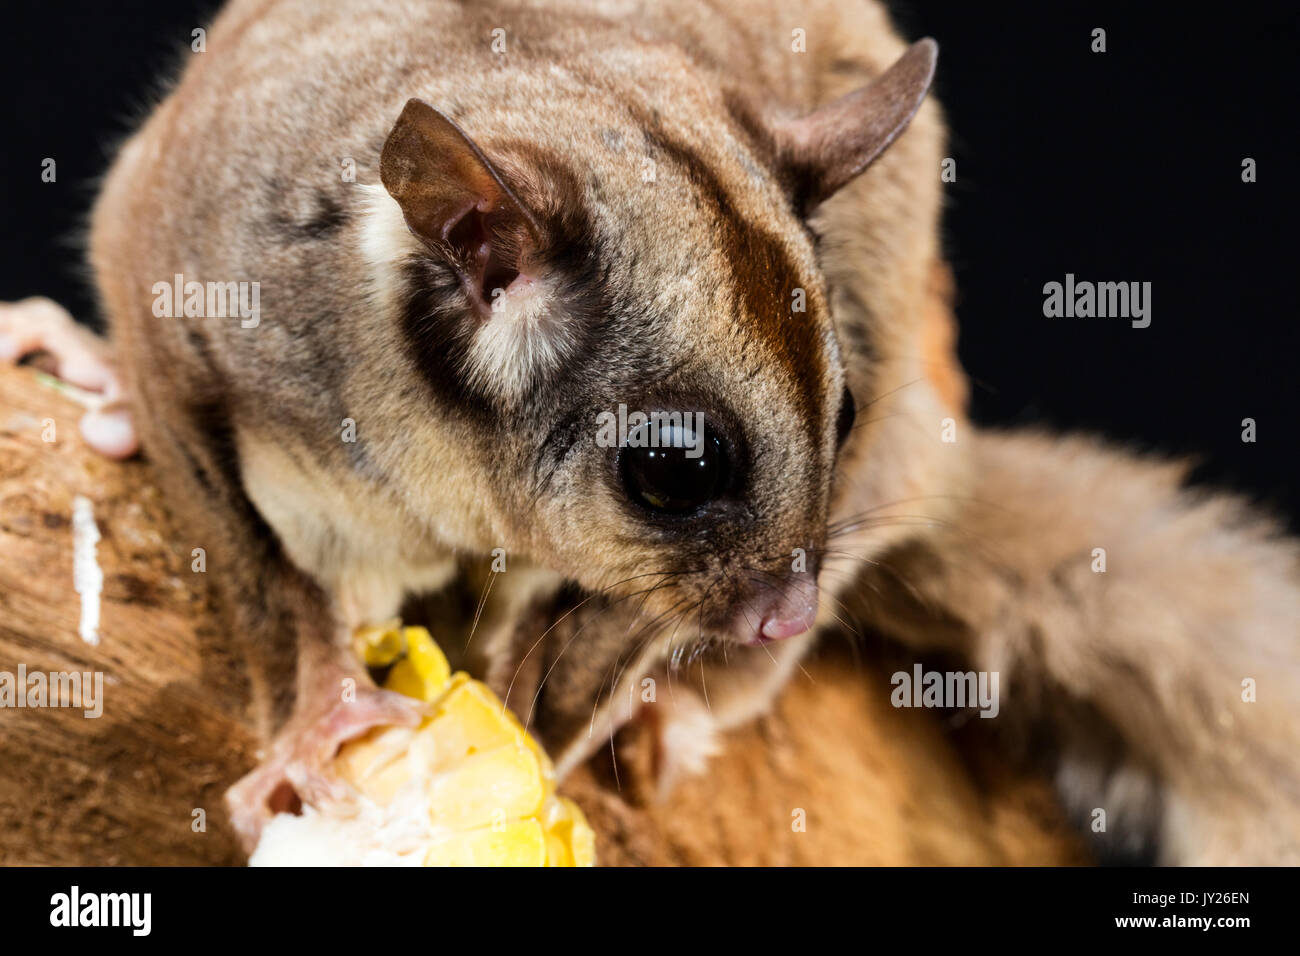 Close up of an Australian Sugar Glider on a branch eating a piece of corn Stock Photo